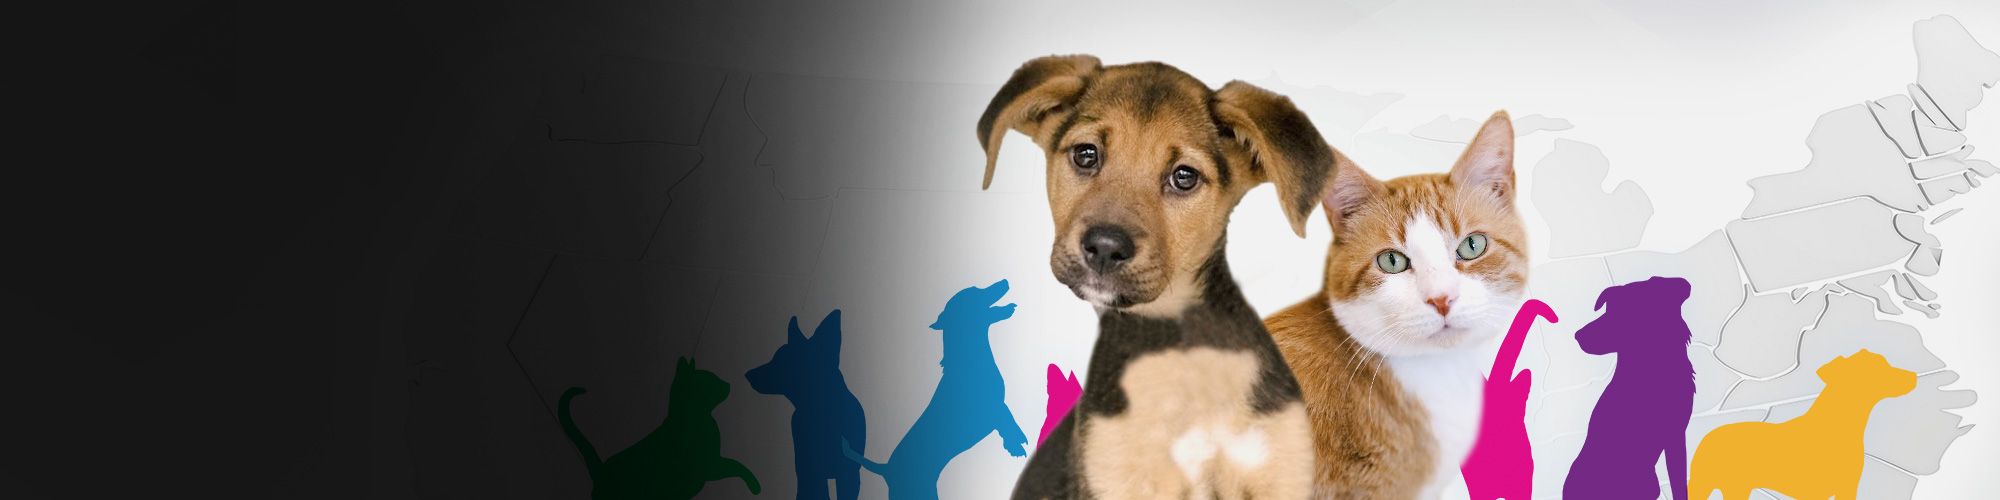 North Shore Animal League America | World's Largest Animal Rescue Org